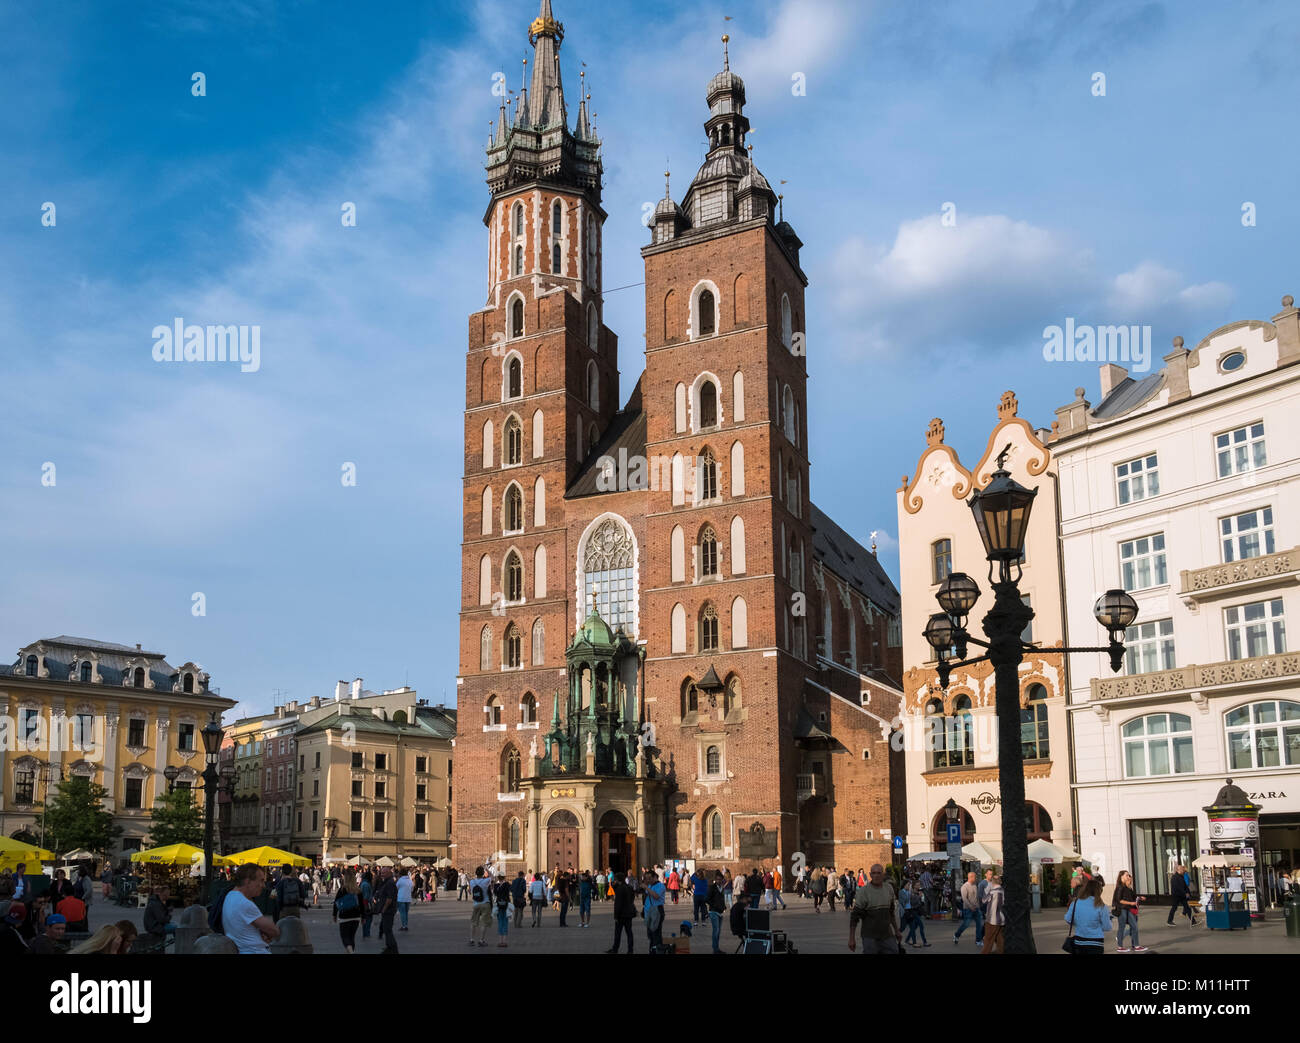 Church of Our Lady Assumed into Heaven (also known as St. Mary's Church), a city landmark in Old Town, Krakow, Poland Stock Photo